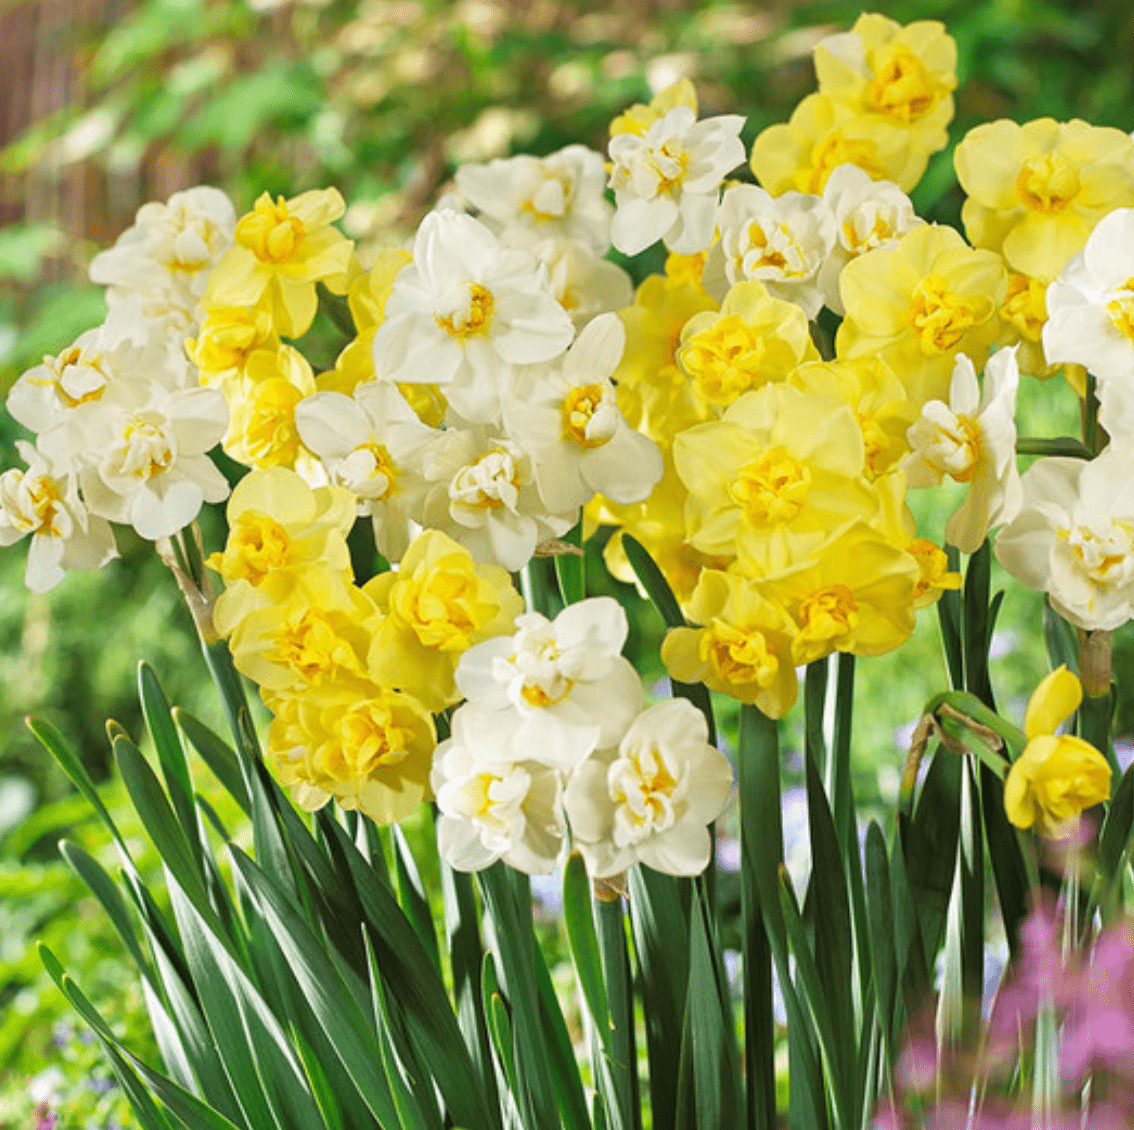 10 of the Best Daffodil Bulbs to Plant